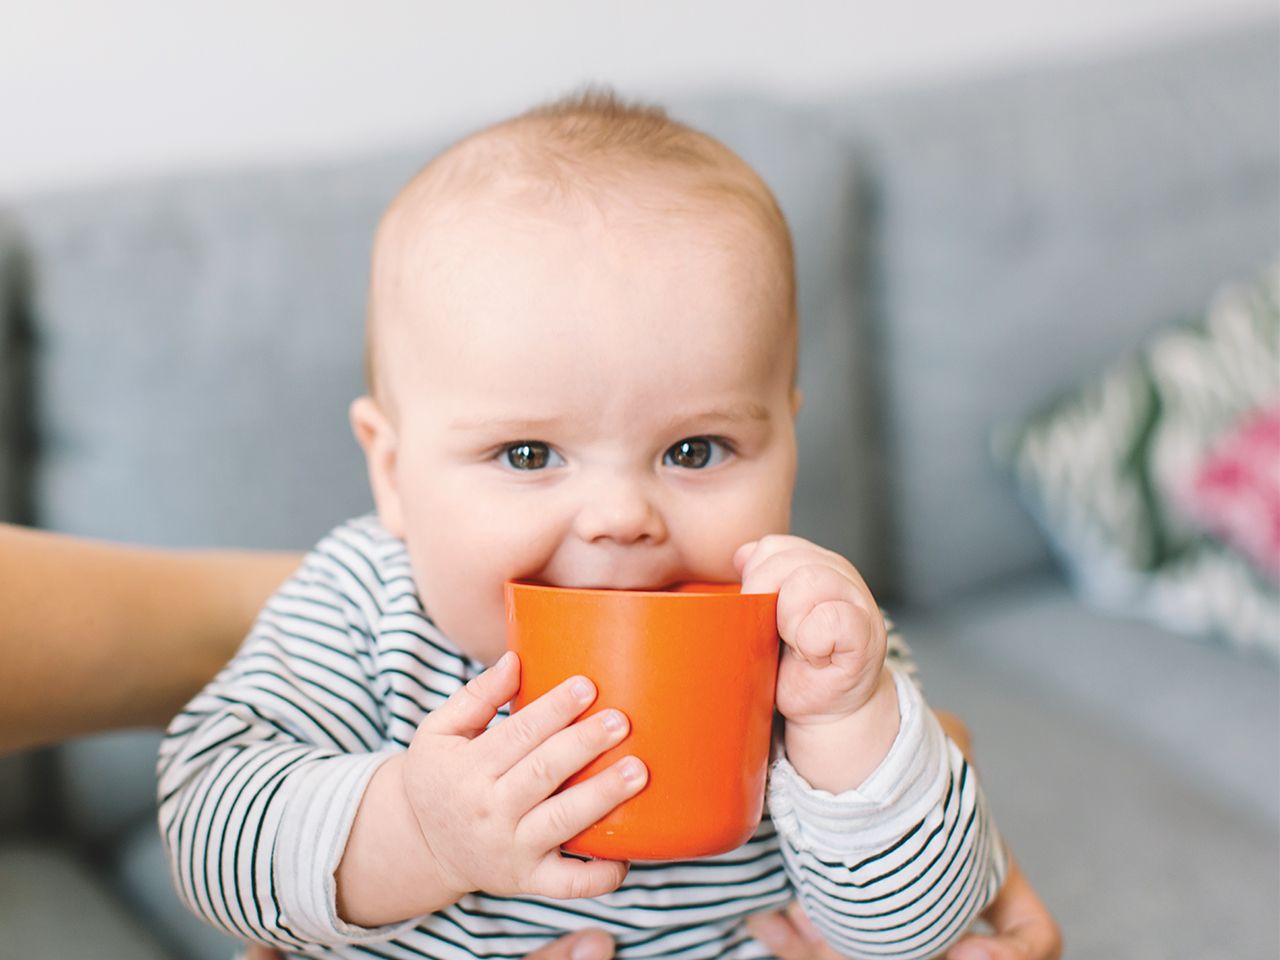 Review of the best sippy cups for babies in 2022 - advantages, disadvantages and price